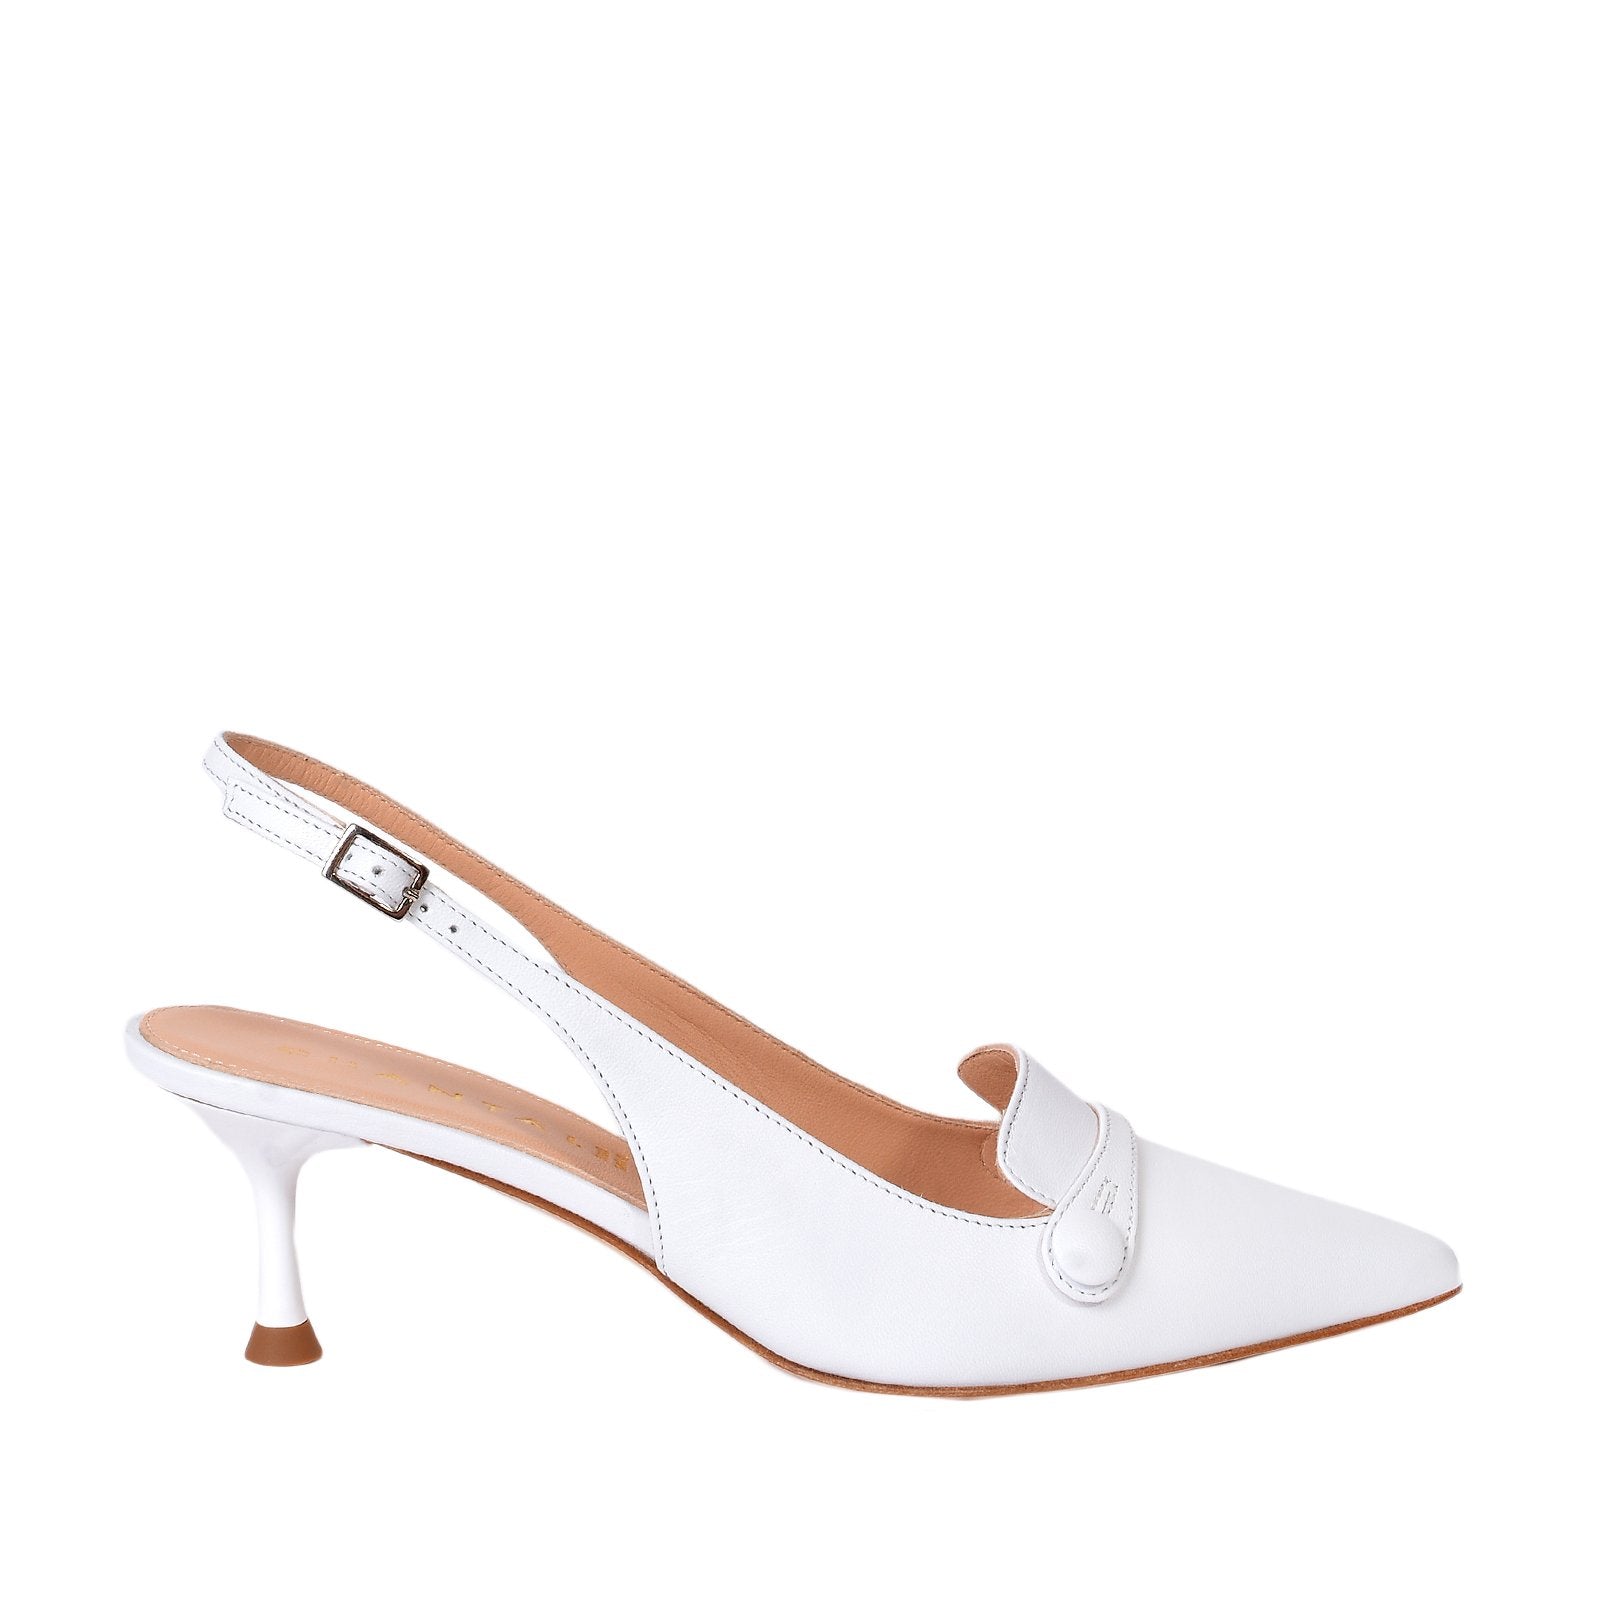 Capretto Sling Back Shoes In White Heels 1002/White - 1